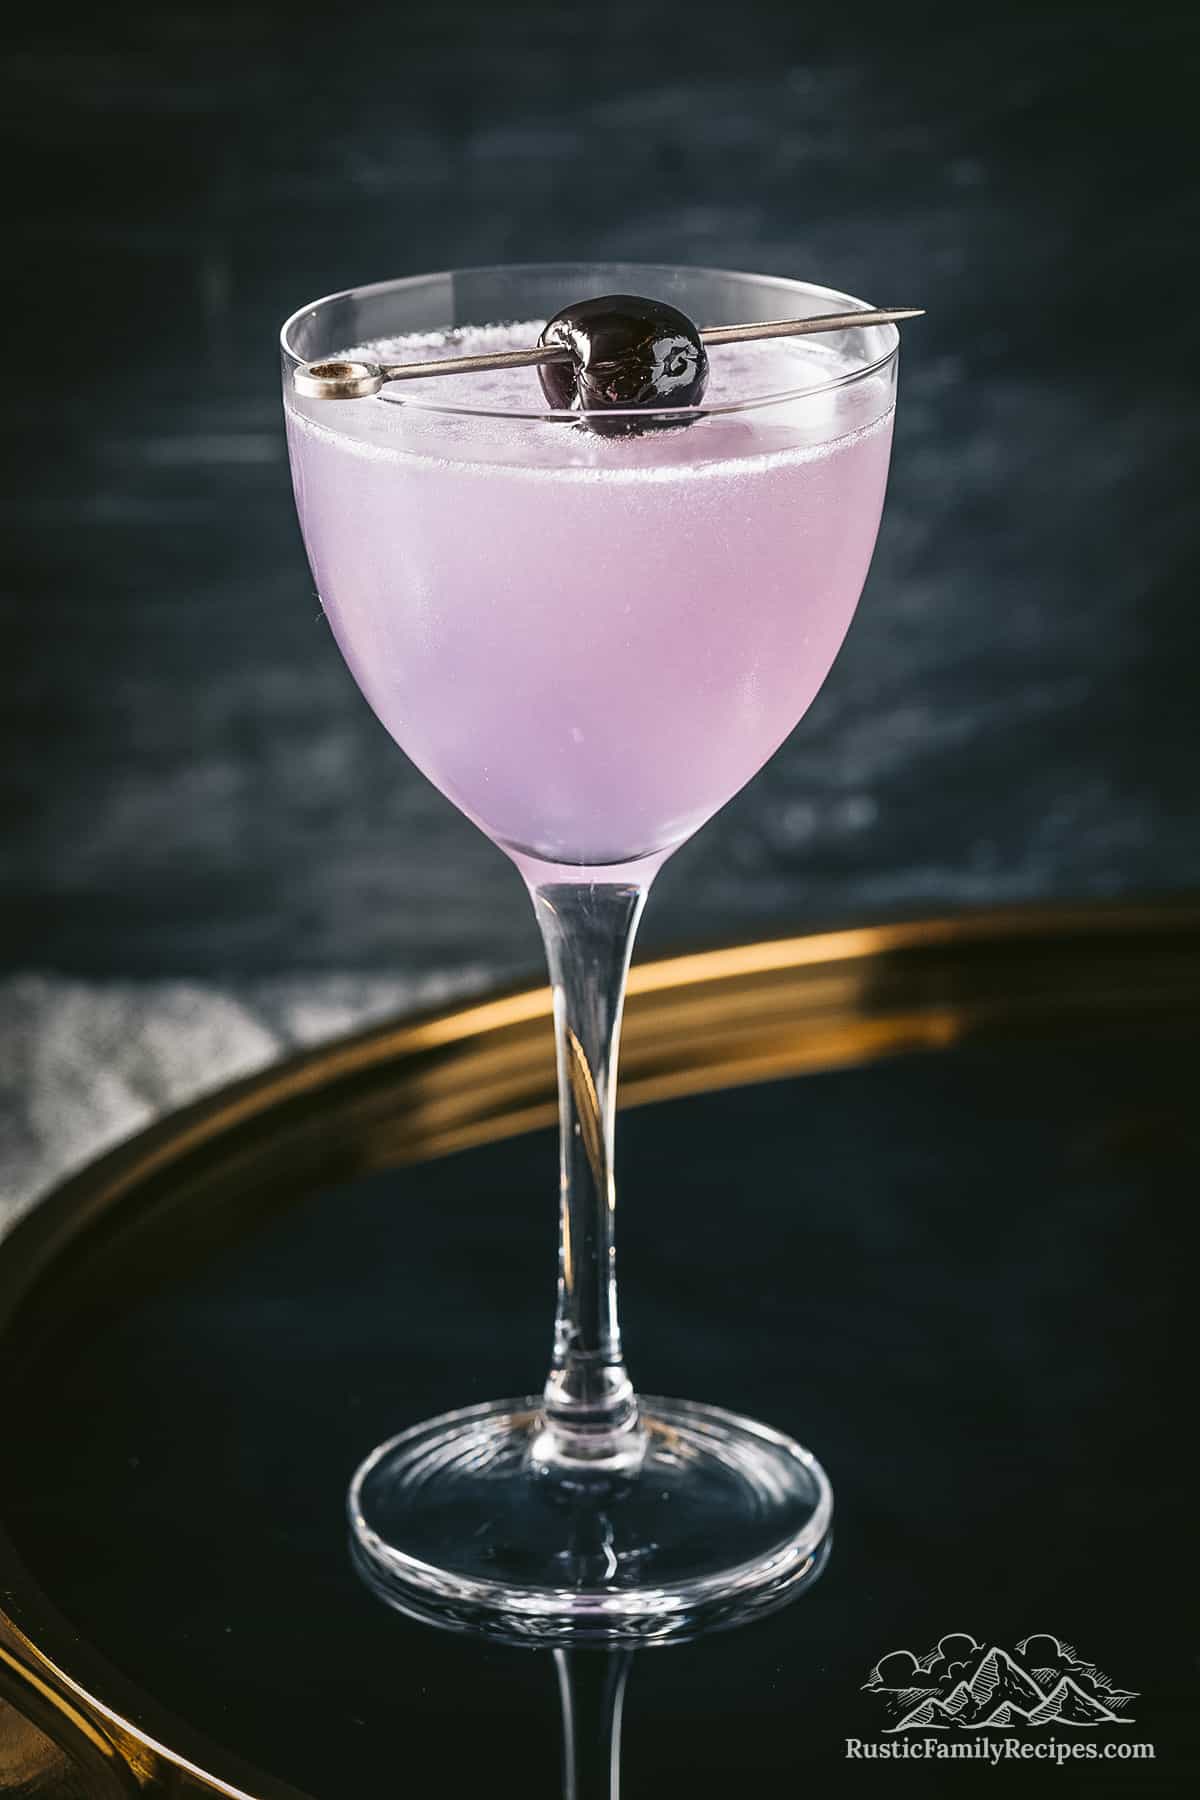 A cocktail glass filled with a purple drink and topped with a brandied cherry